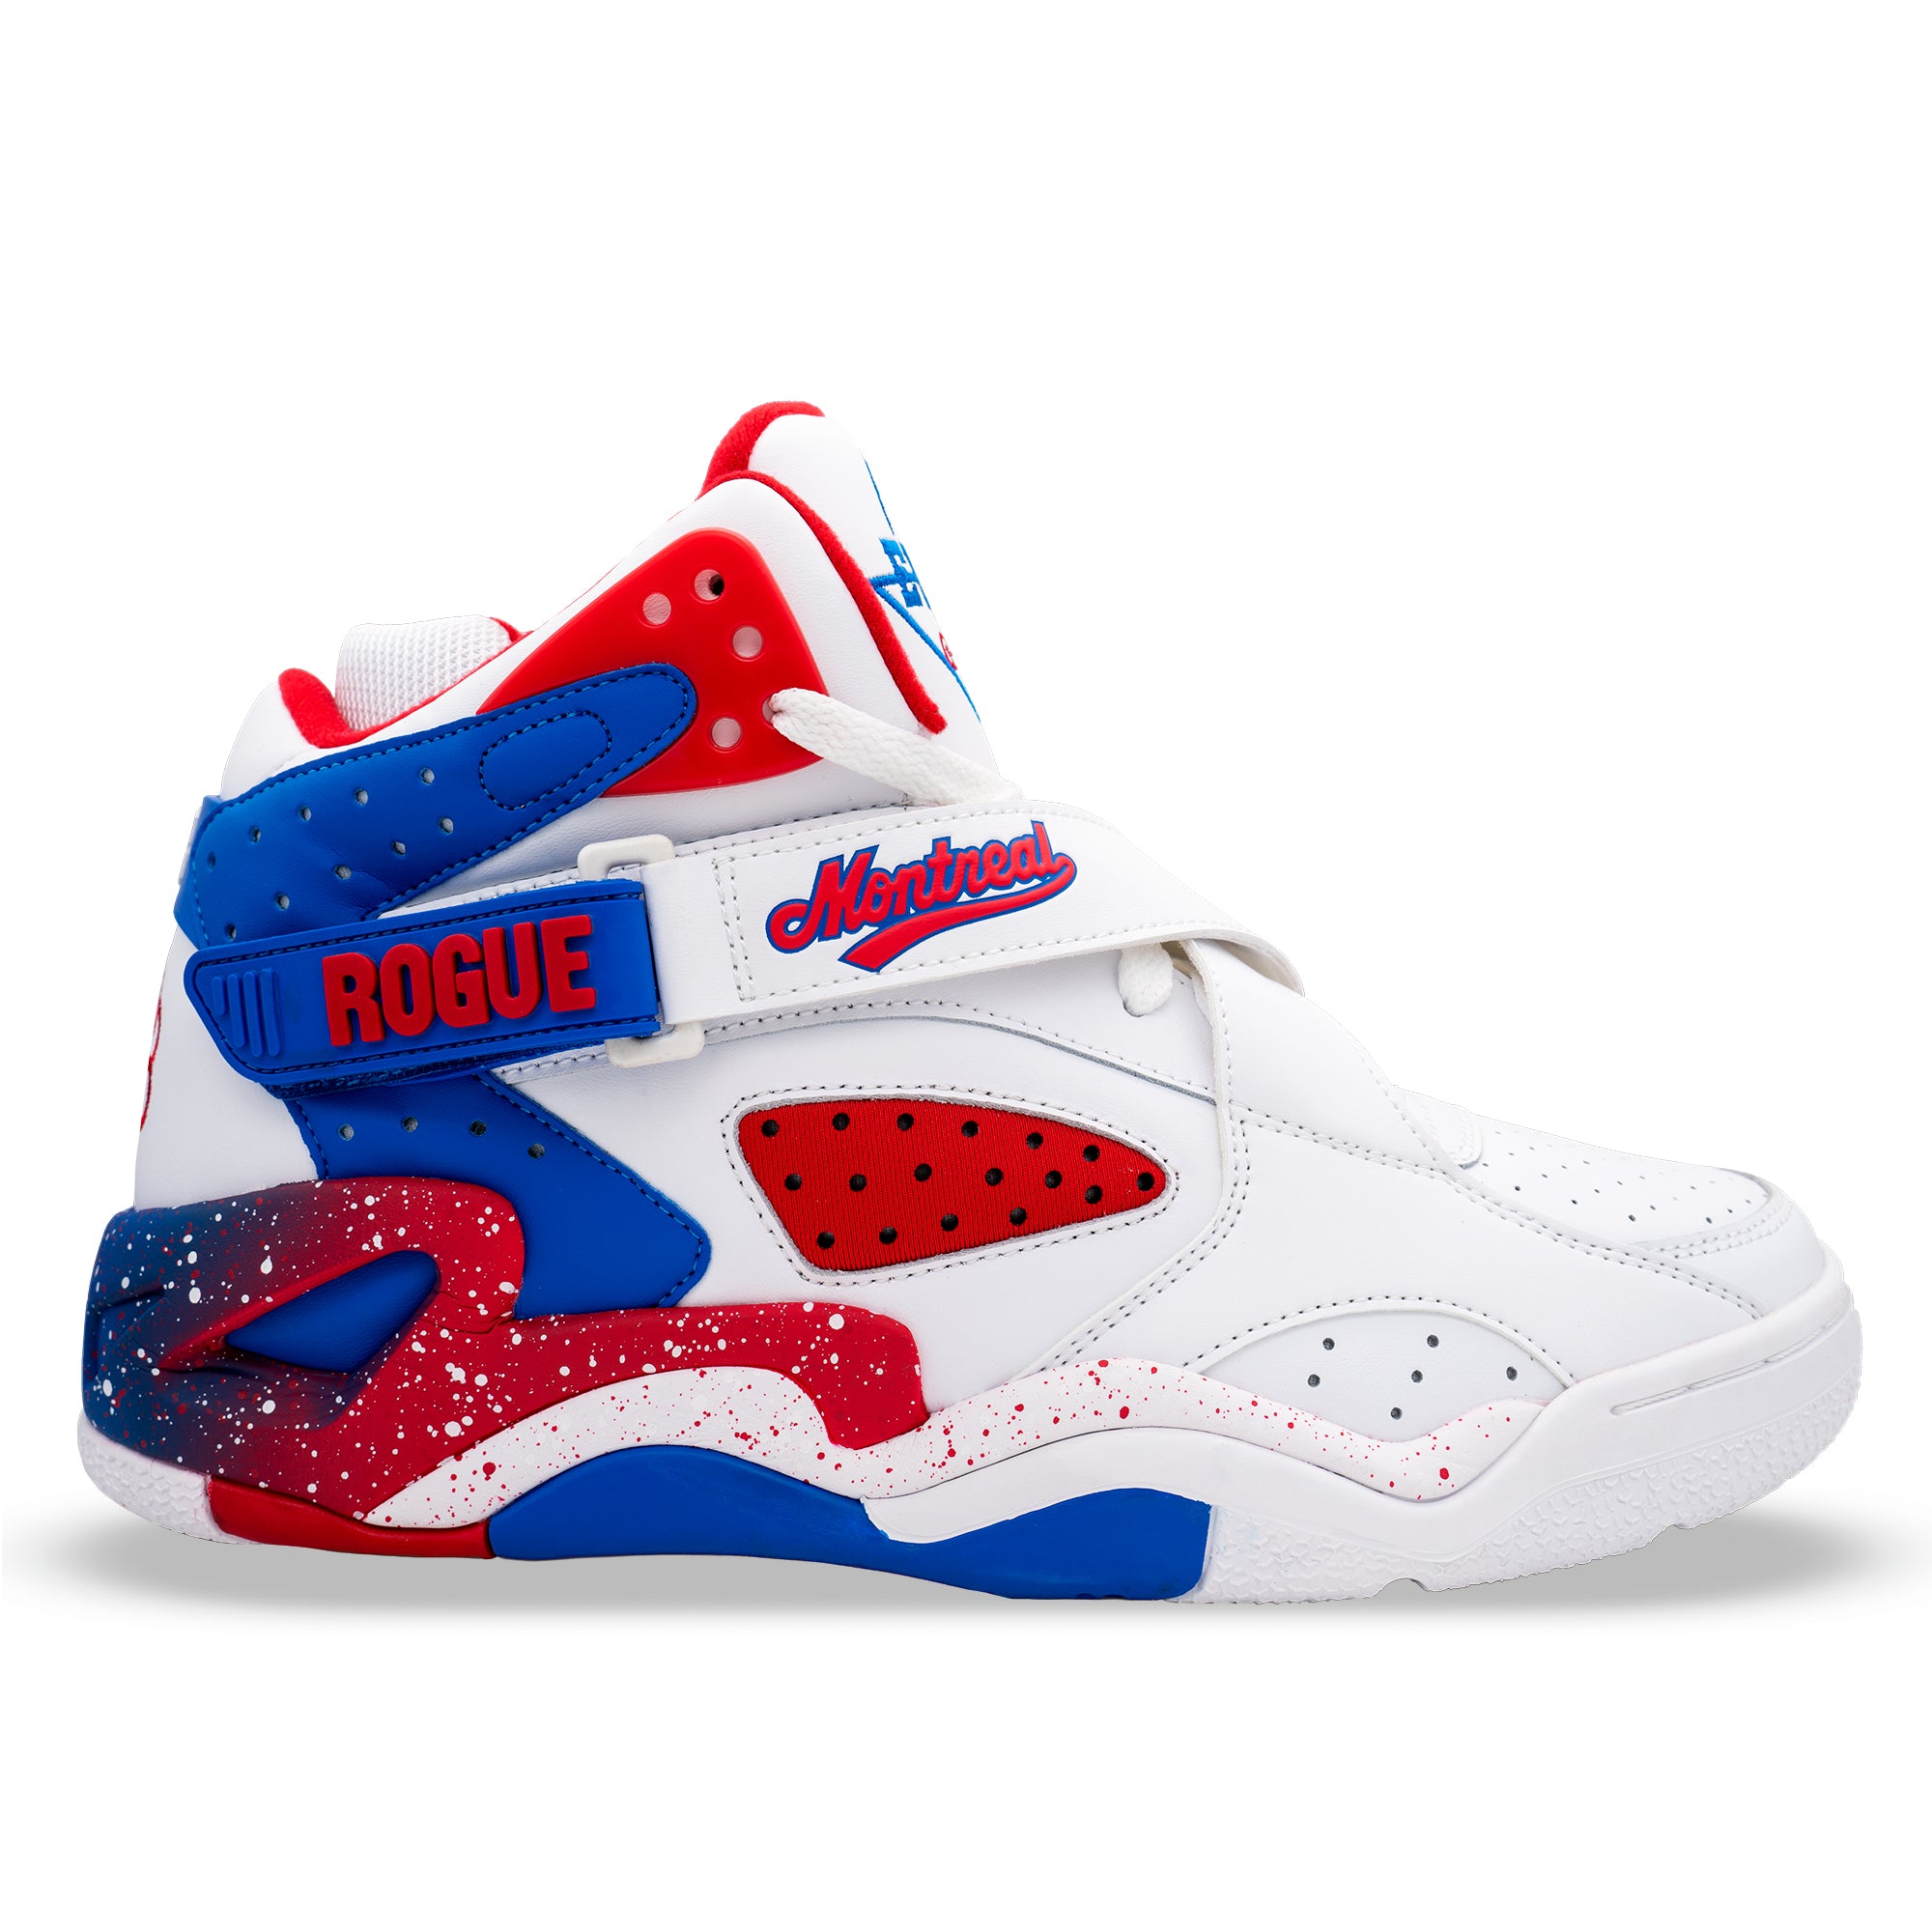 ROGUE White/Royal/Red MONTREAL – Ewing 